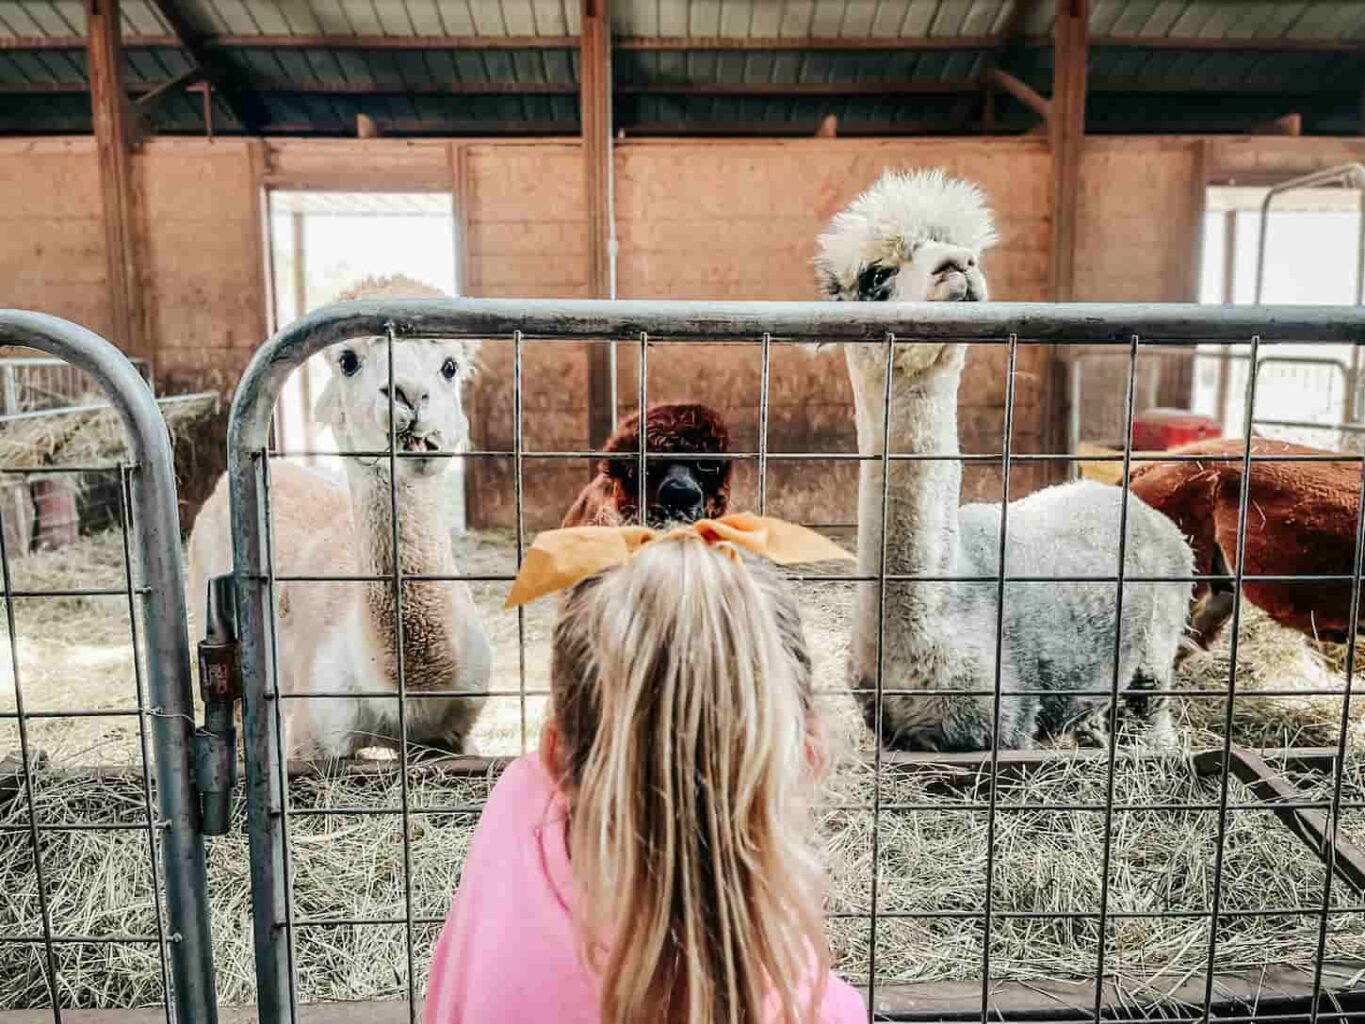 An image of a little girl trying to catch the attention of two llamas in the cage.